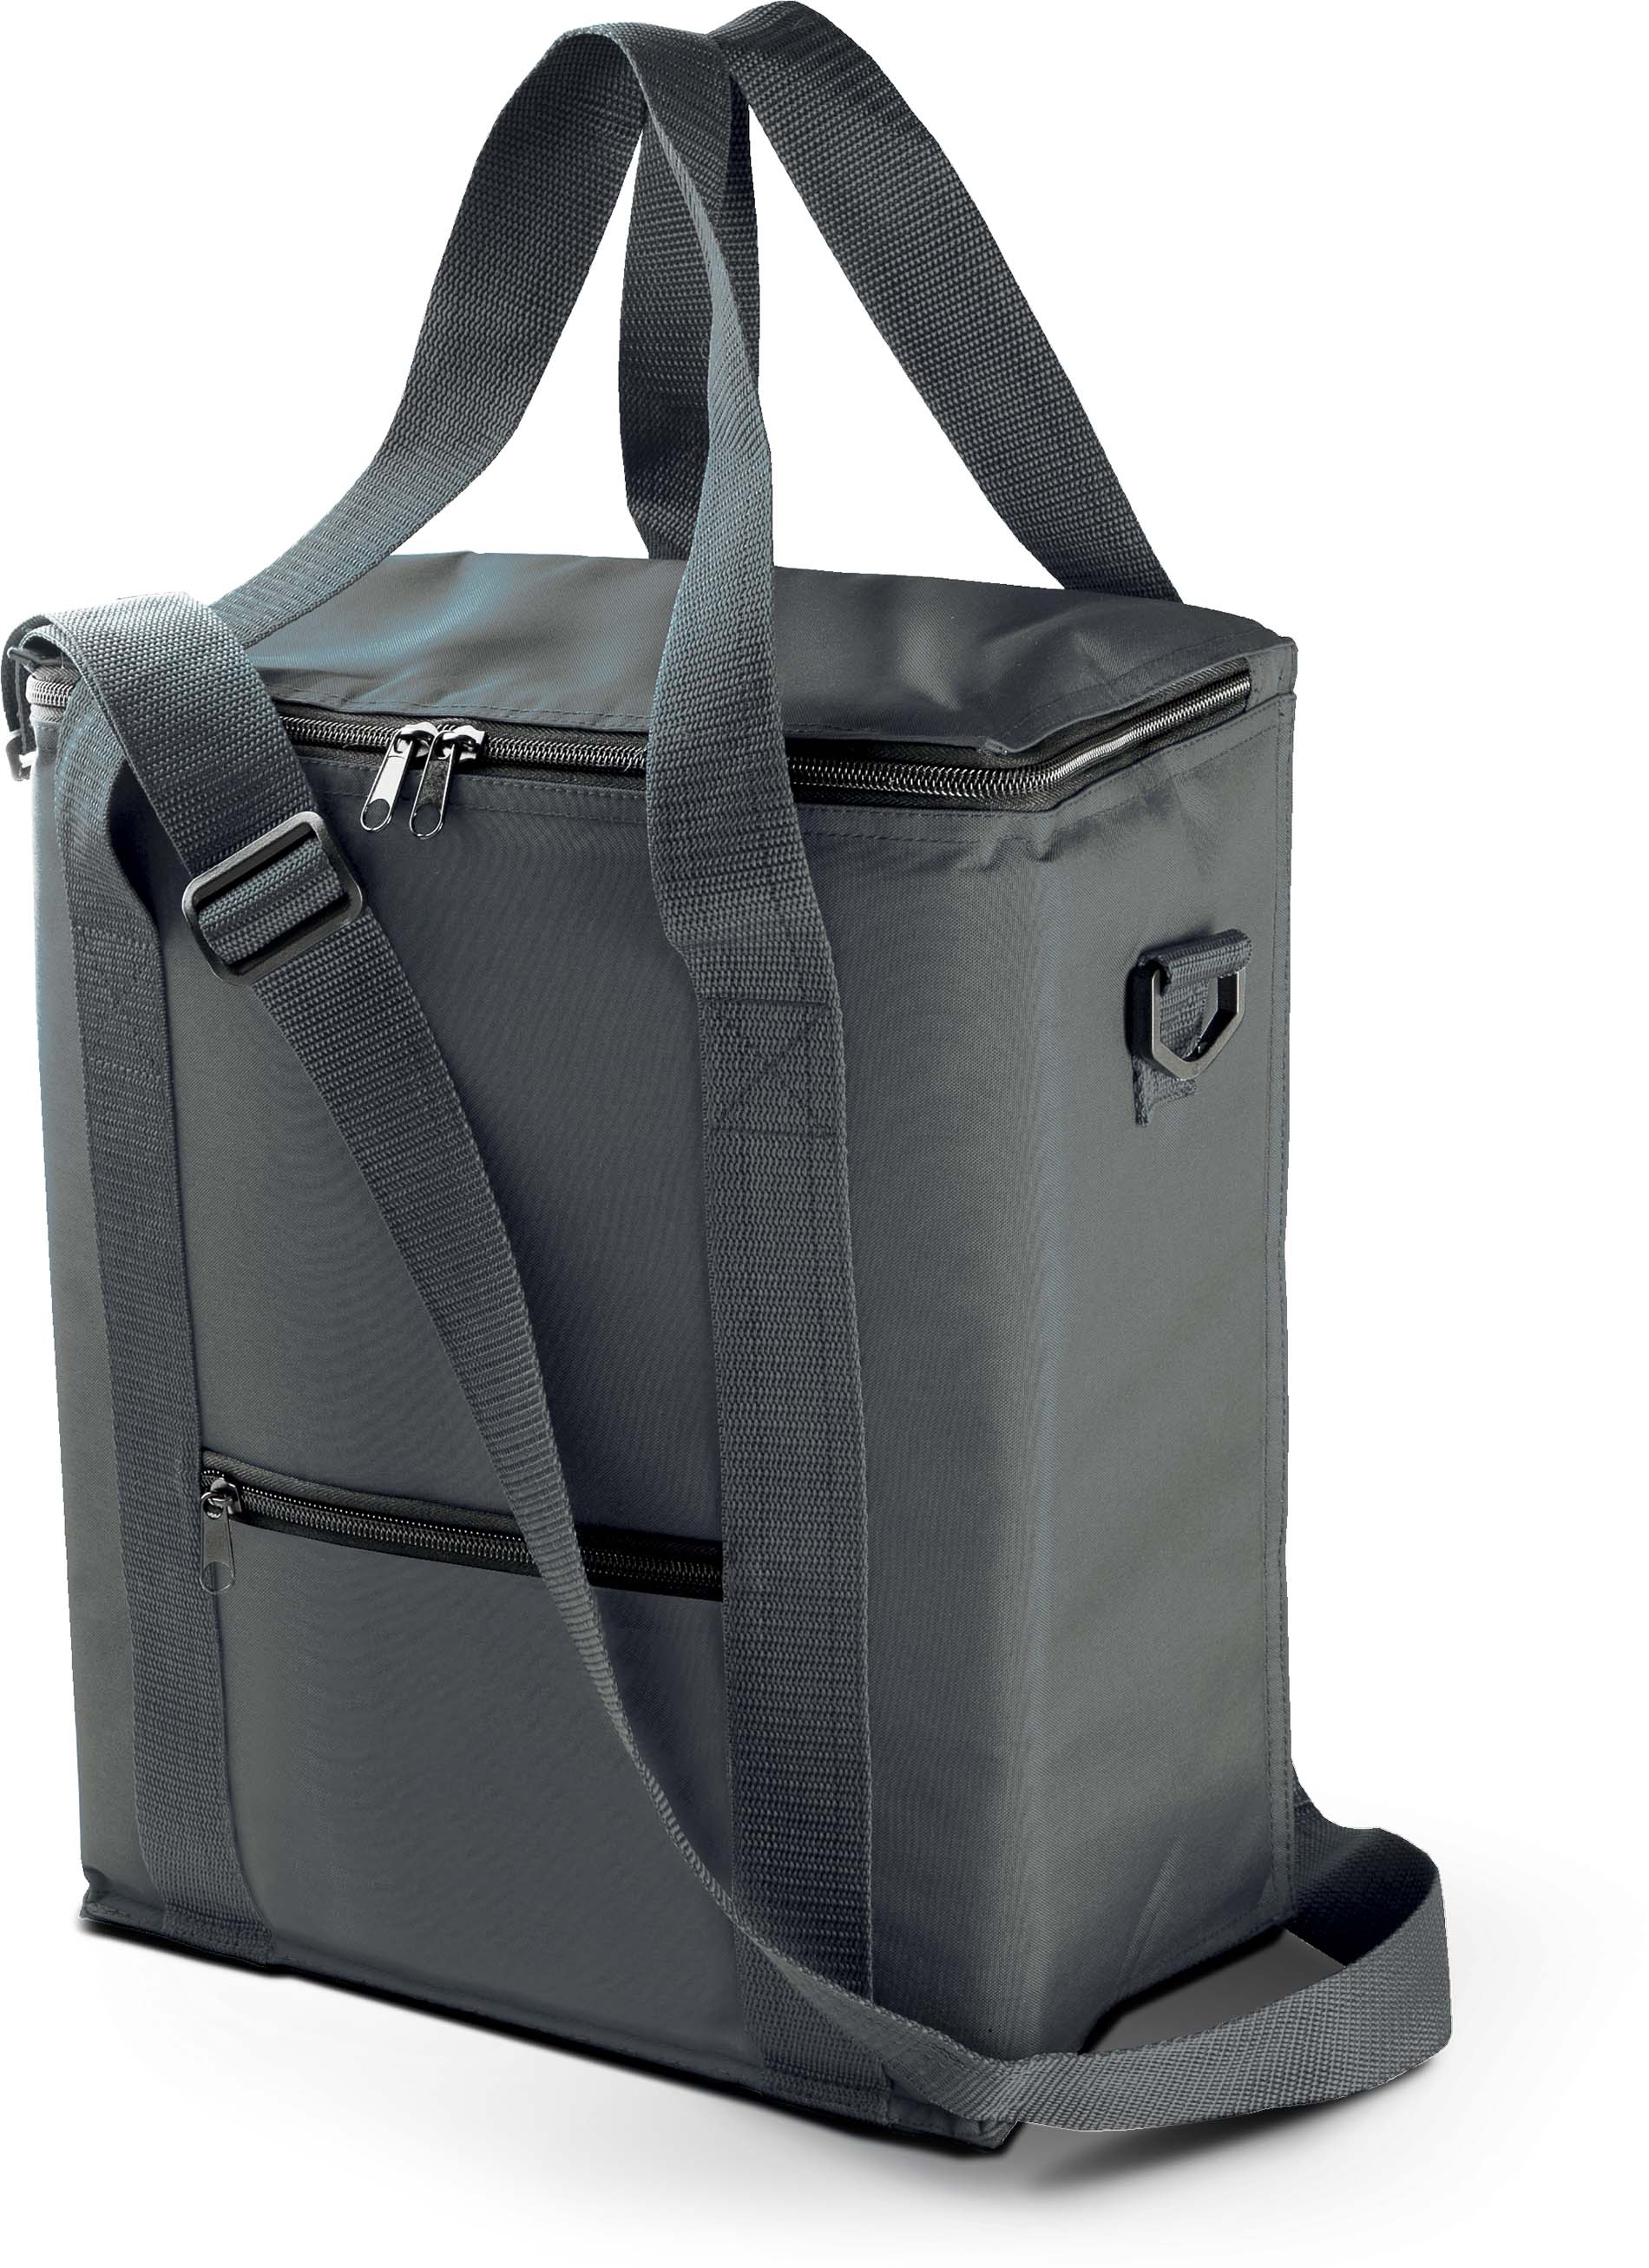 SAC ISOTHERME Full Grey Gris